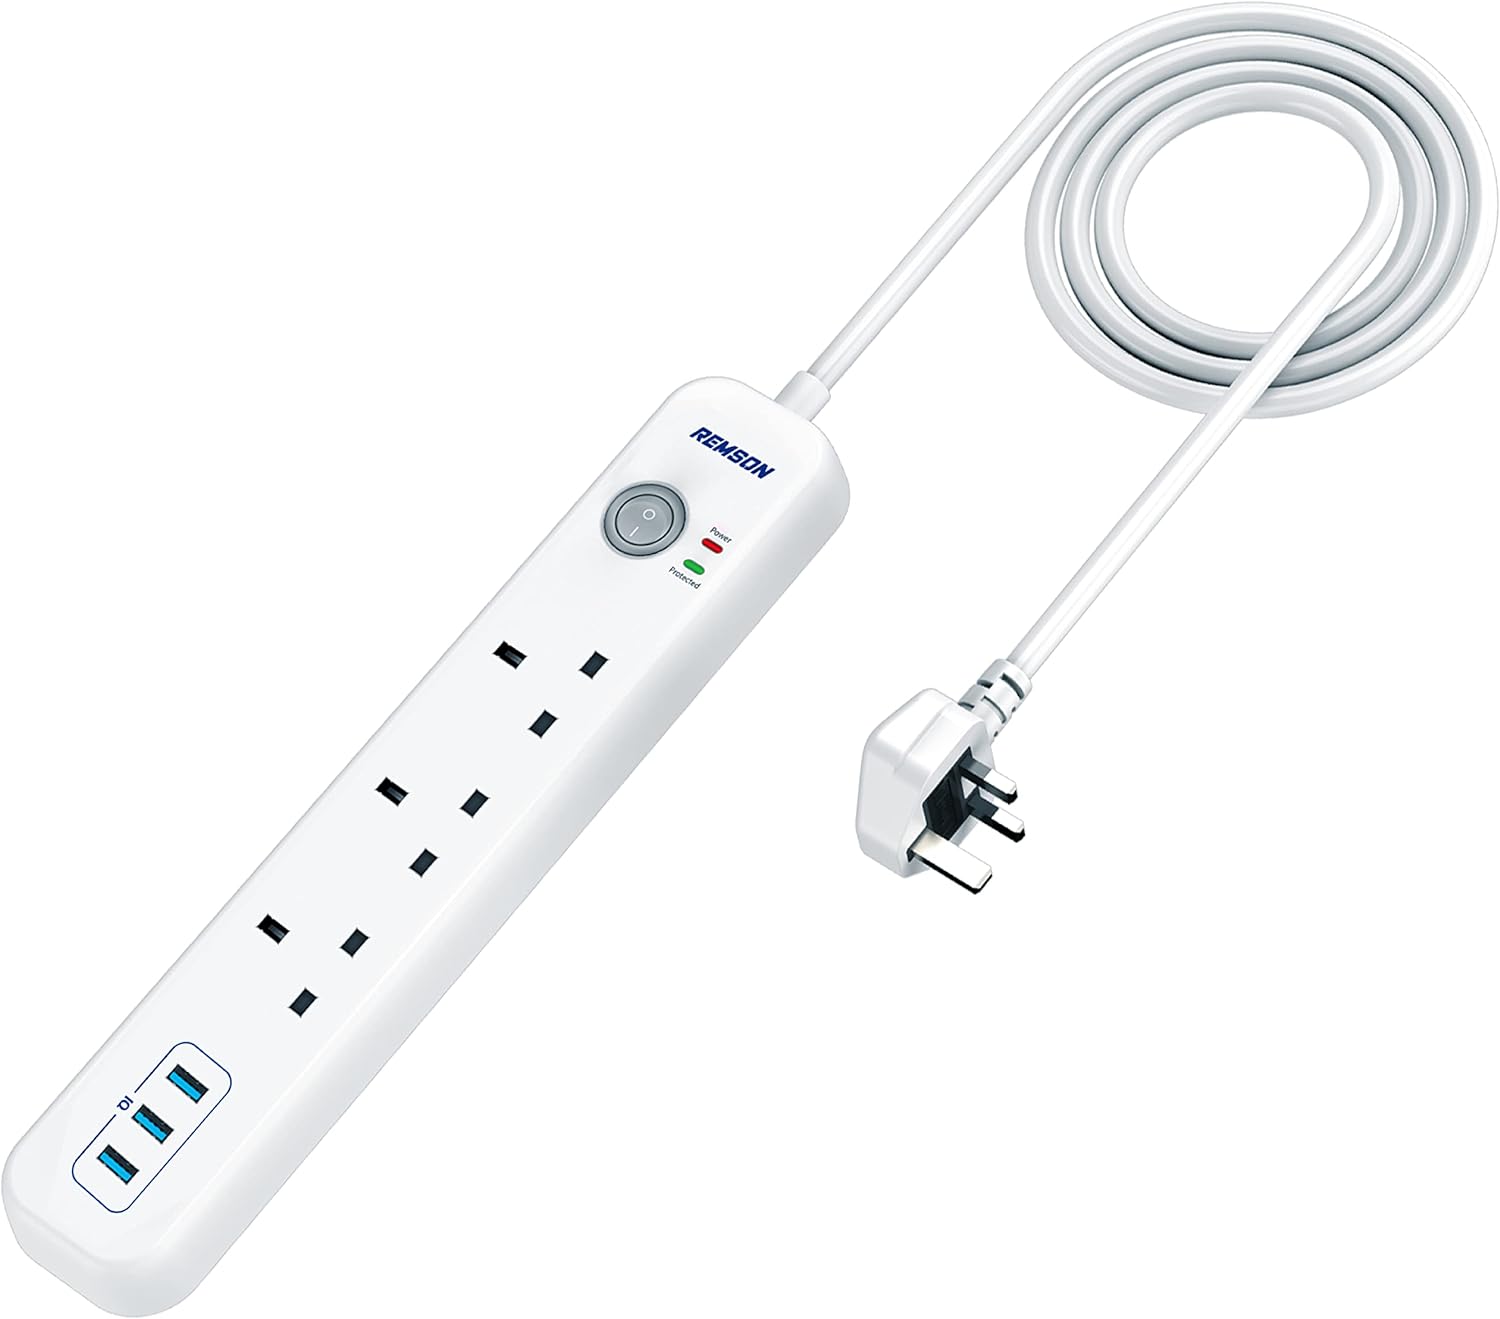 Remson Essential USB Surge Protector 6 Way 3 USB Ports + 3 AC Outlets  With 3M Cable Length